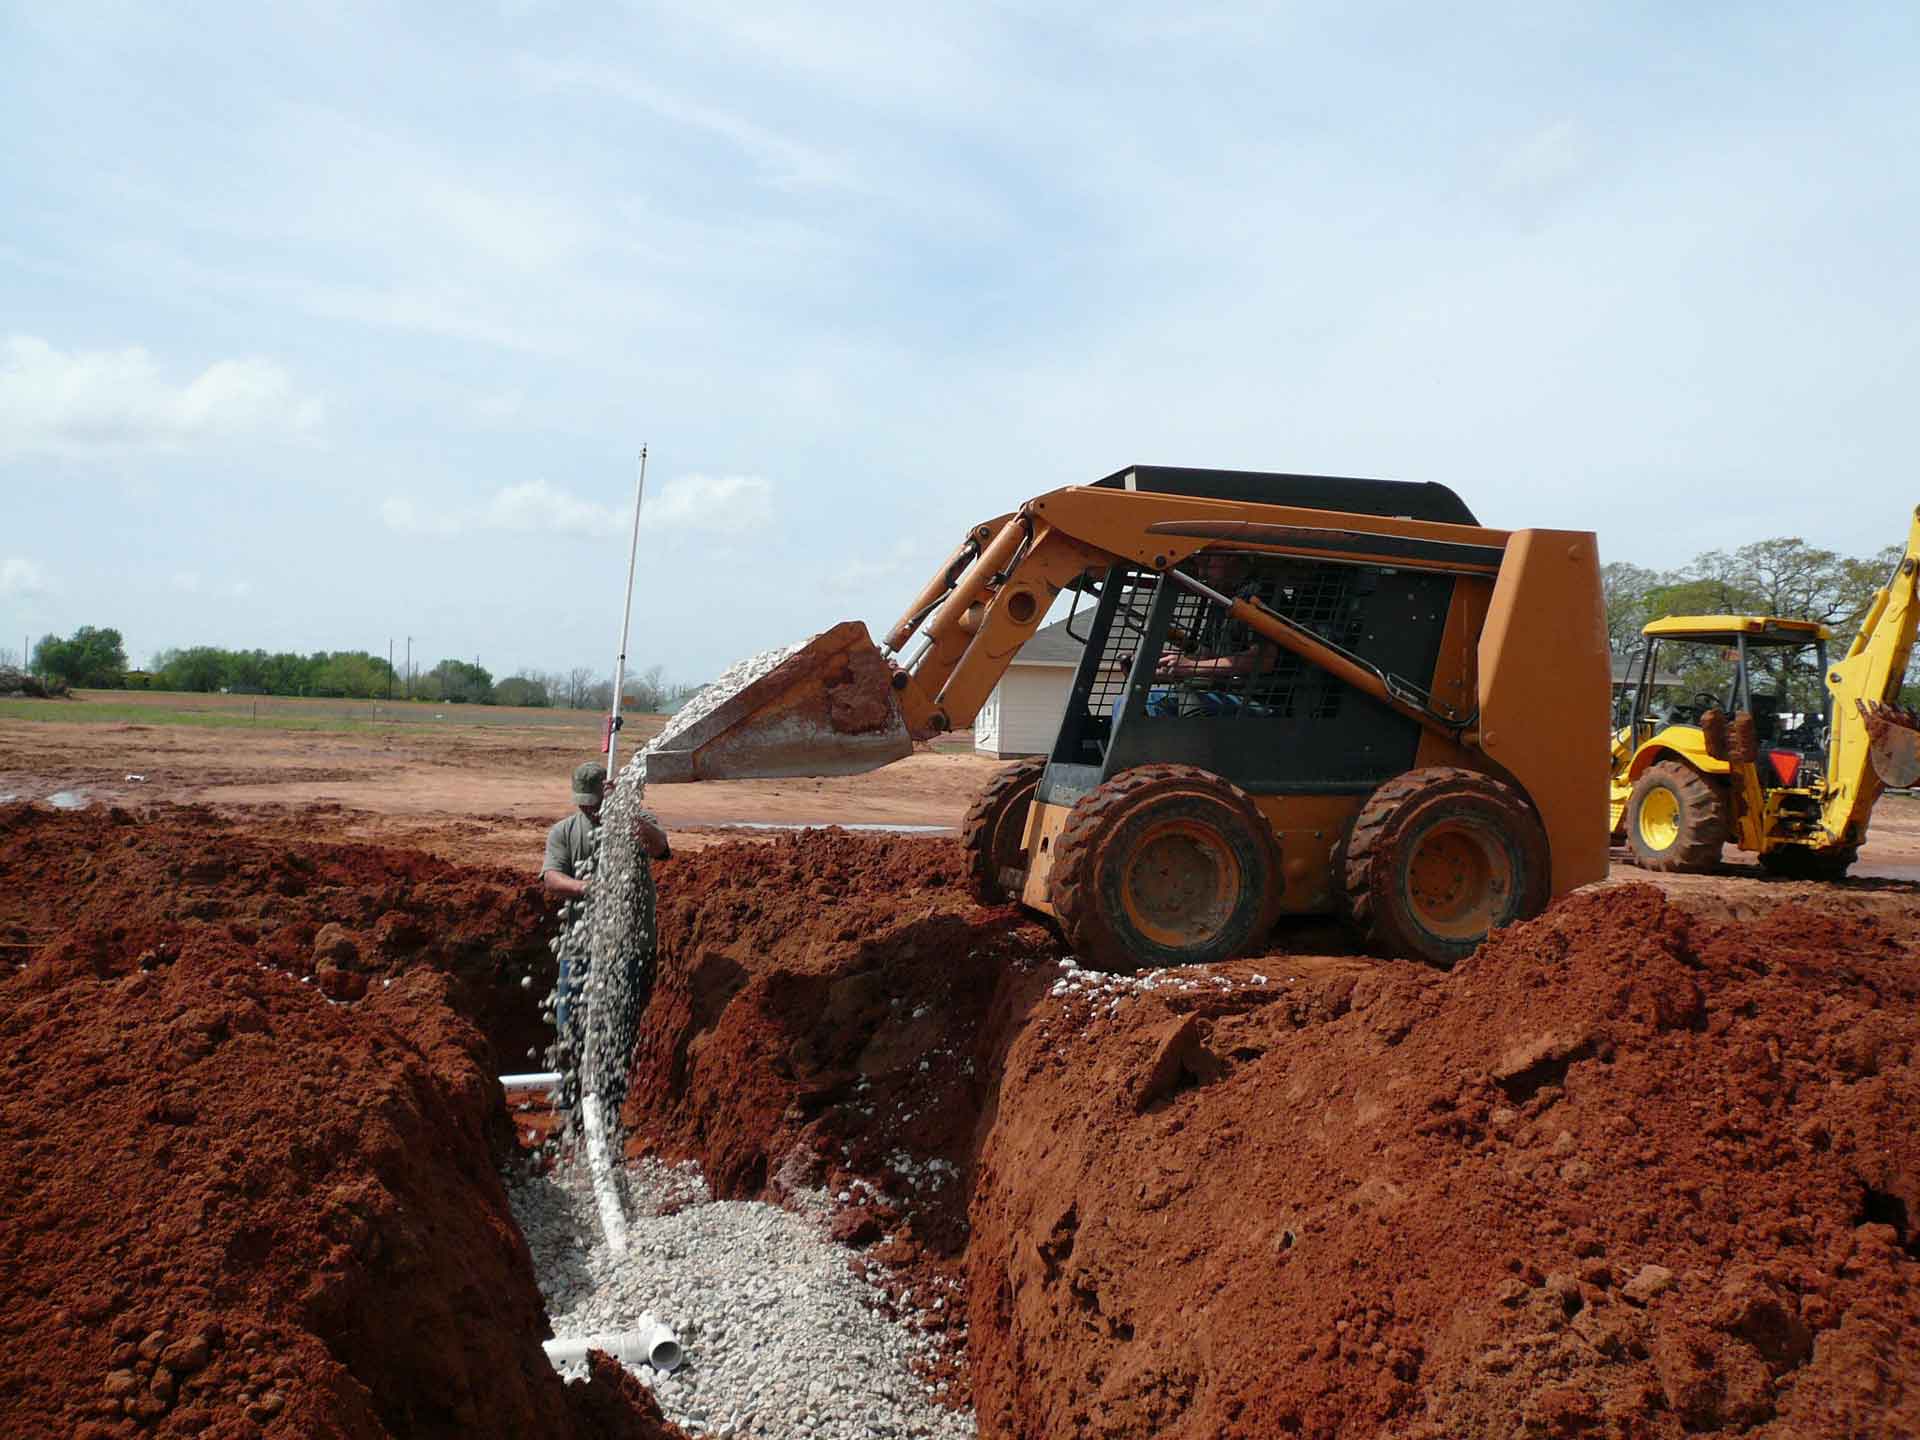 Men using a tractor to fill in a ditch dug for a septic system with gravel